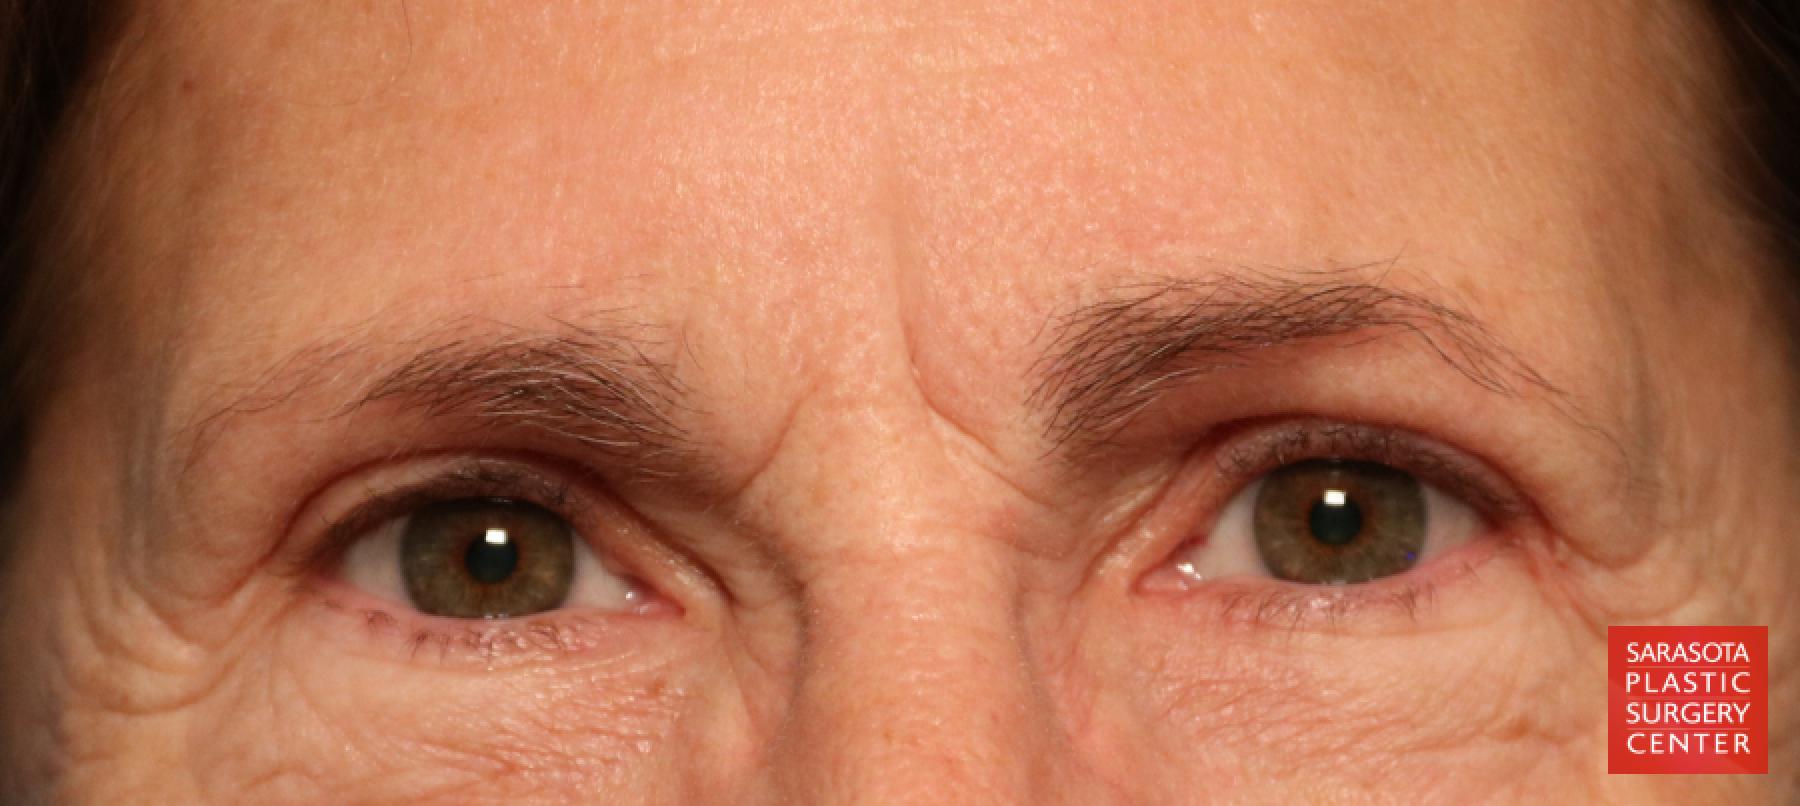 Brow Lift: Patient 1 - Before 1